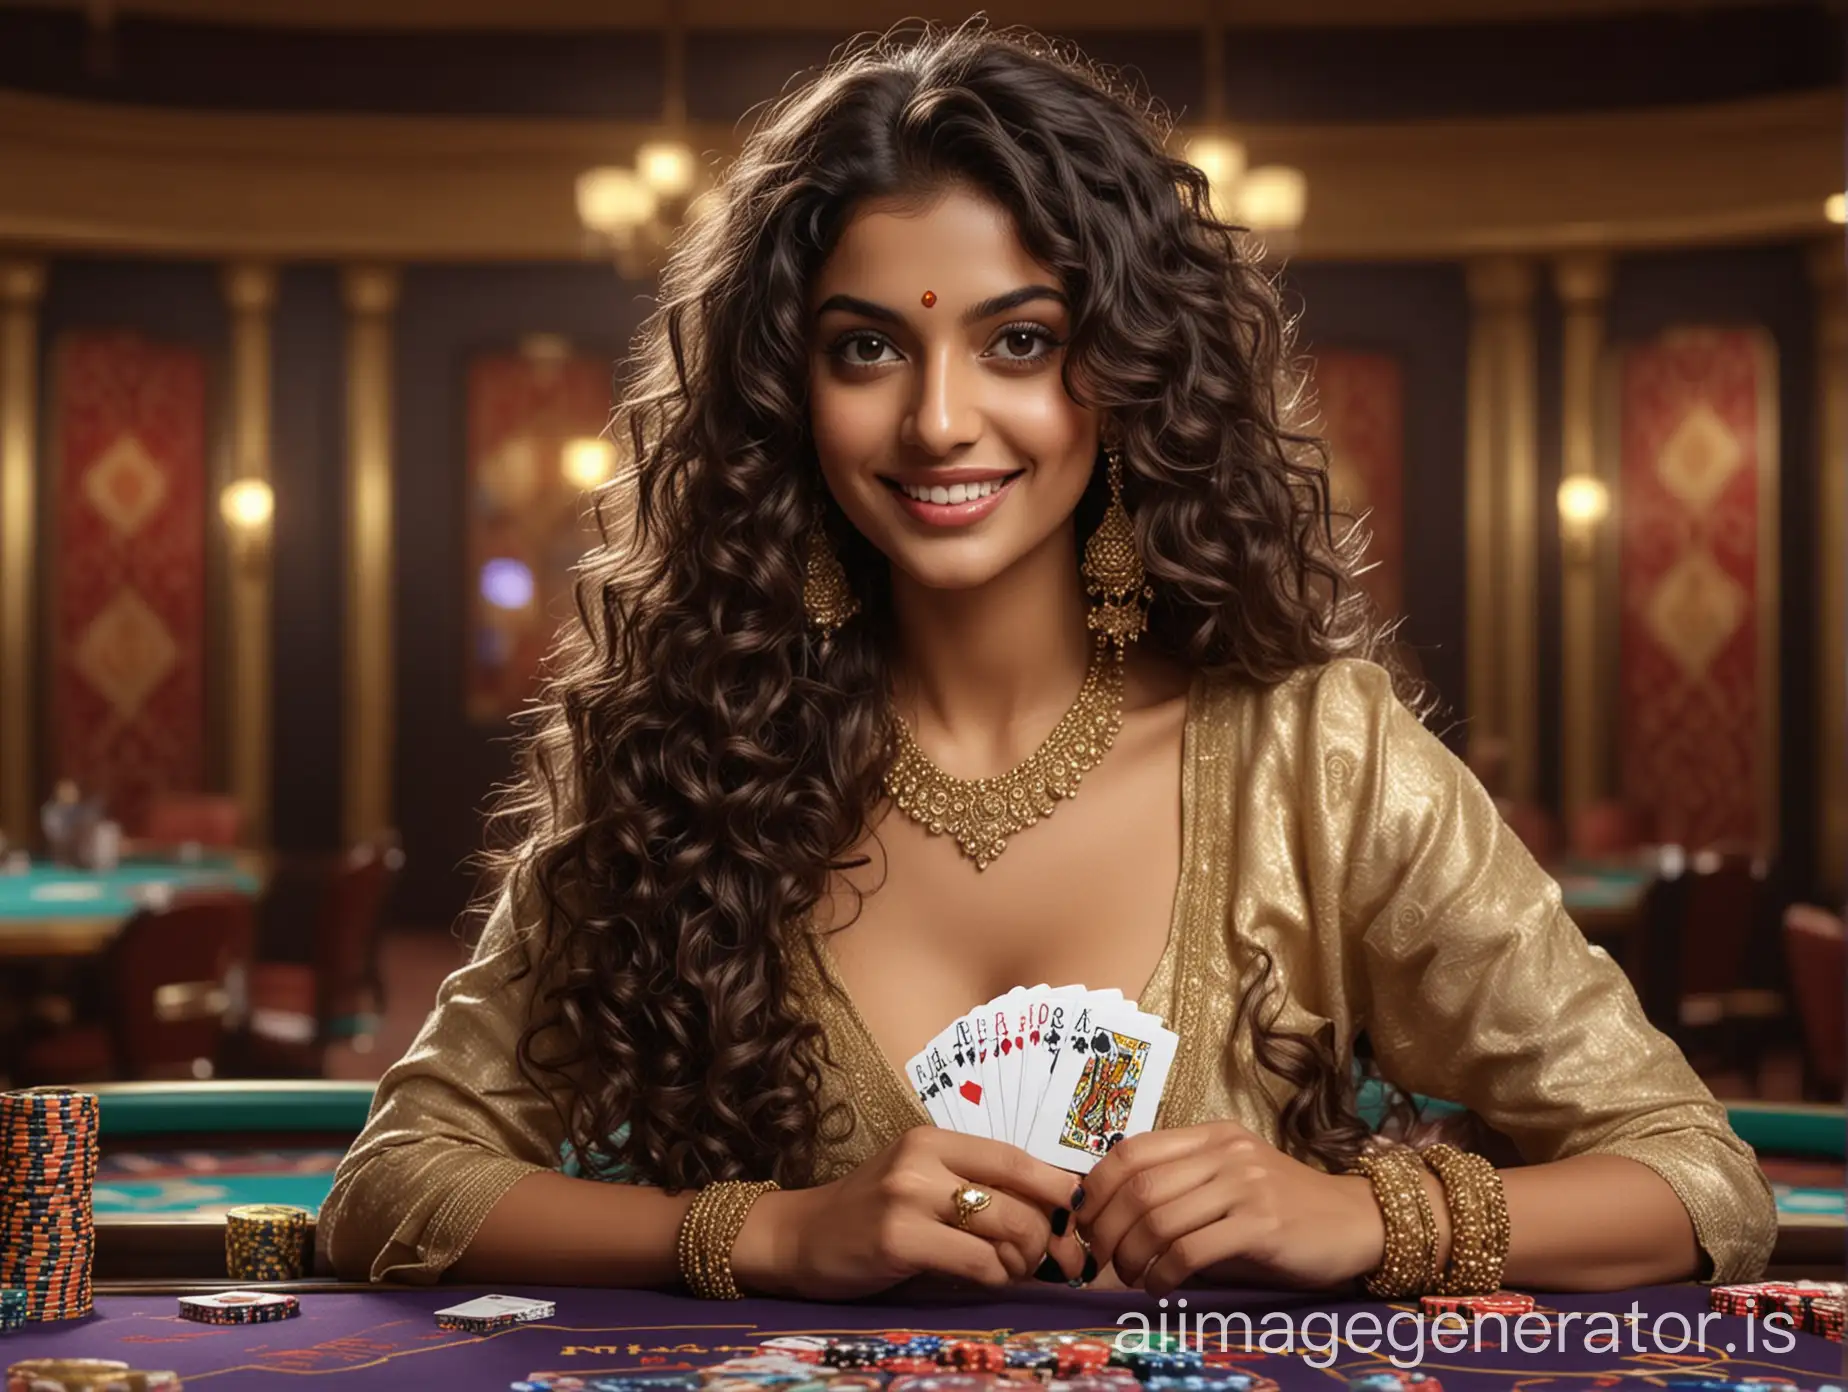 Indian-Model-with-Curly-Hair-Holding-Poker-Cards-in-Casino-Setting